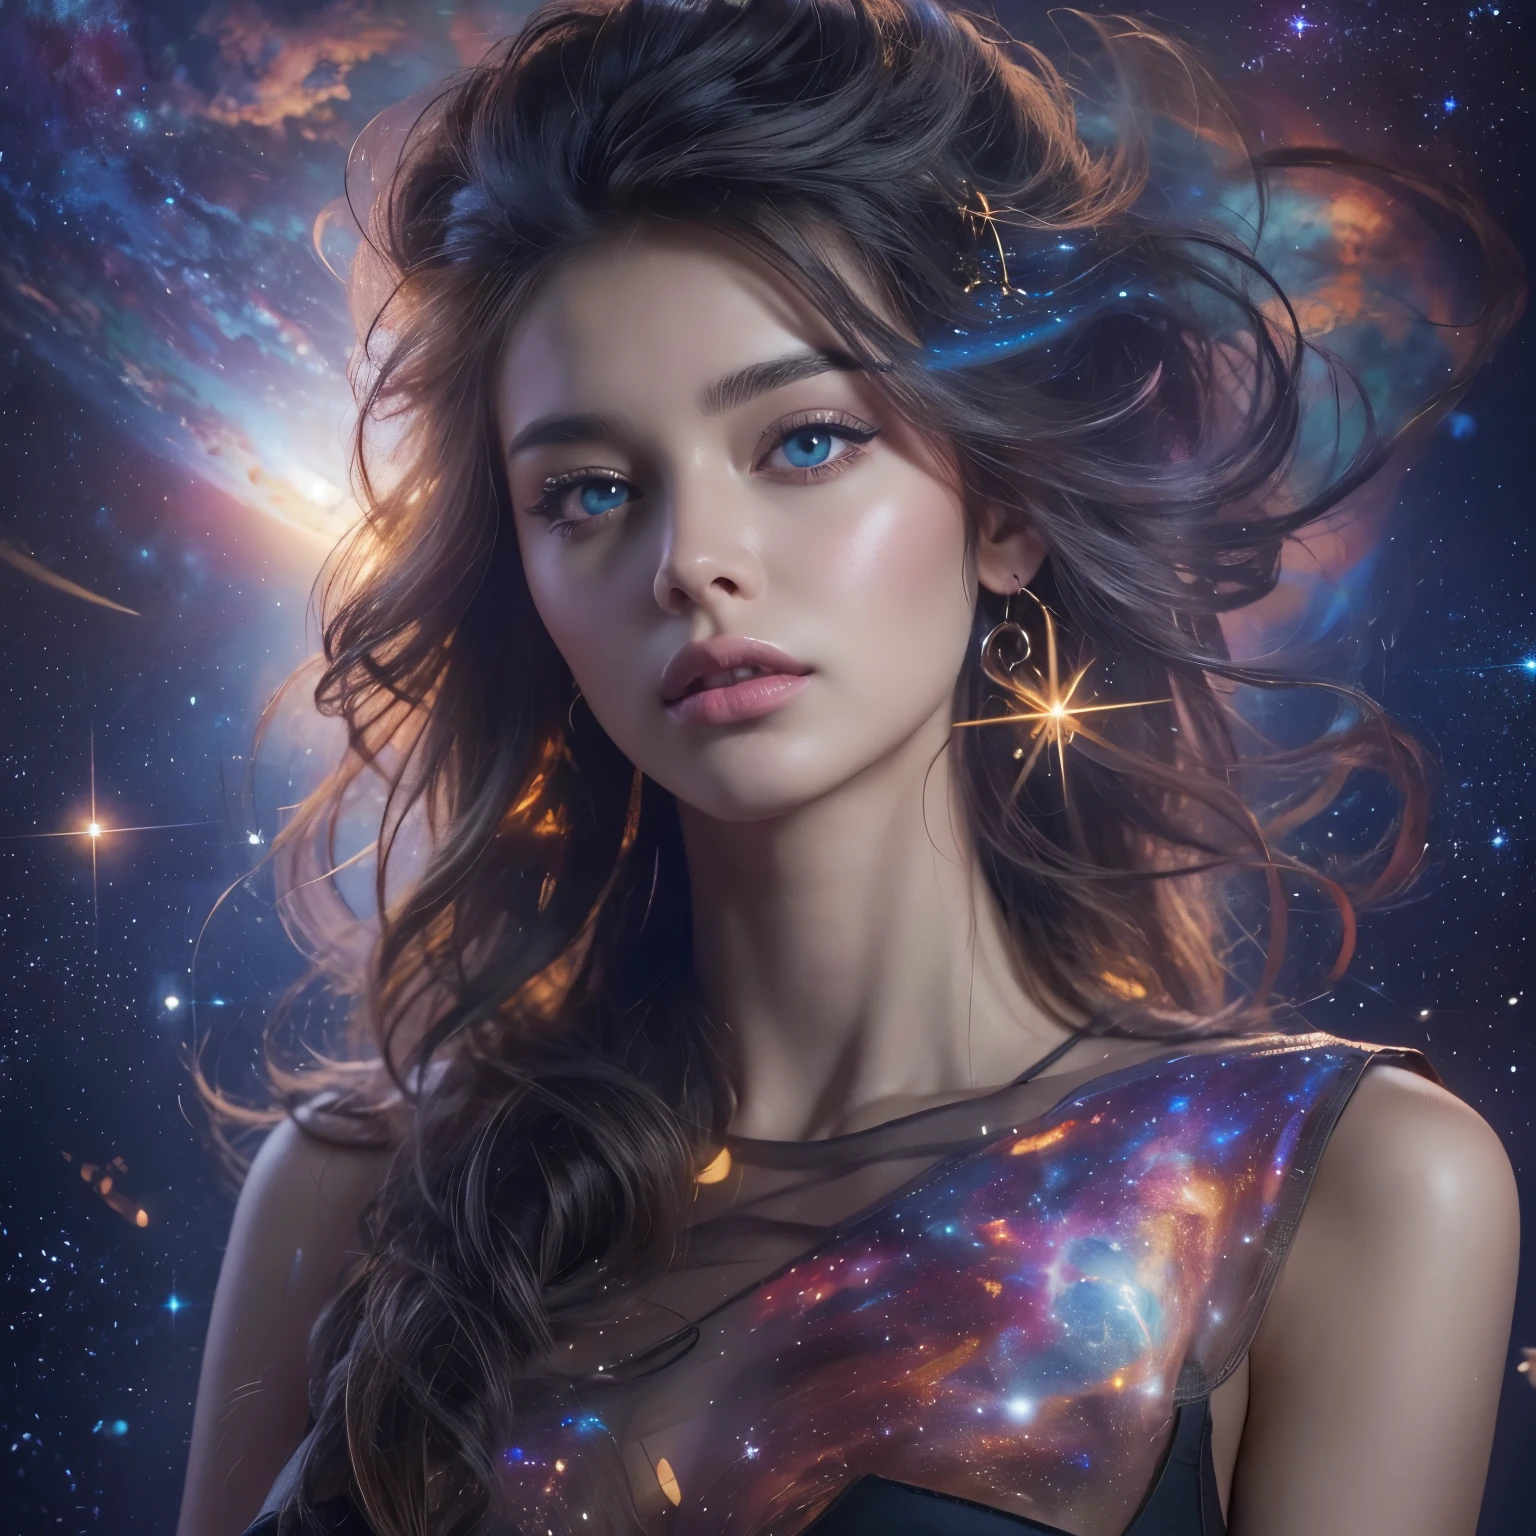 (best quality,4k,highres),beautiful girl with mesmerizing eyes,gorgeous galaxy viewing,sparkling stars,soft cosmic colors,ethereal atmosphere,peaceful serenity,celestial wonders,wonderful universe,stellar beauty,romantic stardust,celestial portrait,cosmic perspective,astounding cosmic art,galactic elegance,transcendent charm,celestial goddess,cosmic enchantment,cosmic girl admiring the magnificent galaxy,cosmic dreamworld,galactic reverie,cosmic masterpiece:1.2